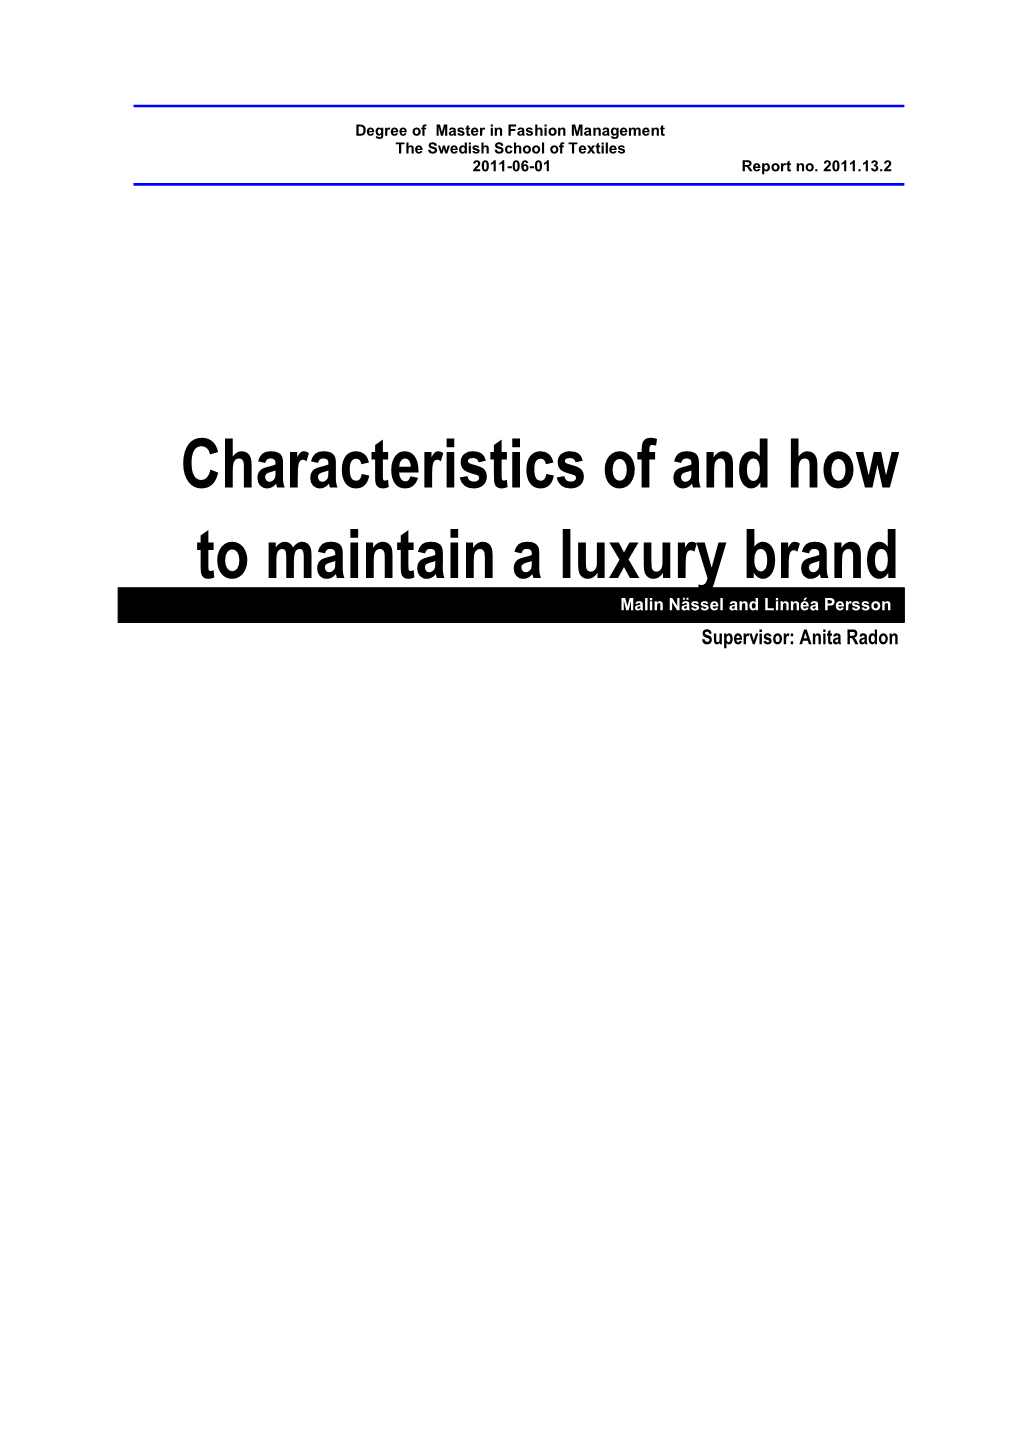 Characteristics of and How to Maintain a Luxury Brand Malin Nässel and Linnéa Persson Supervisor: Anita Radon